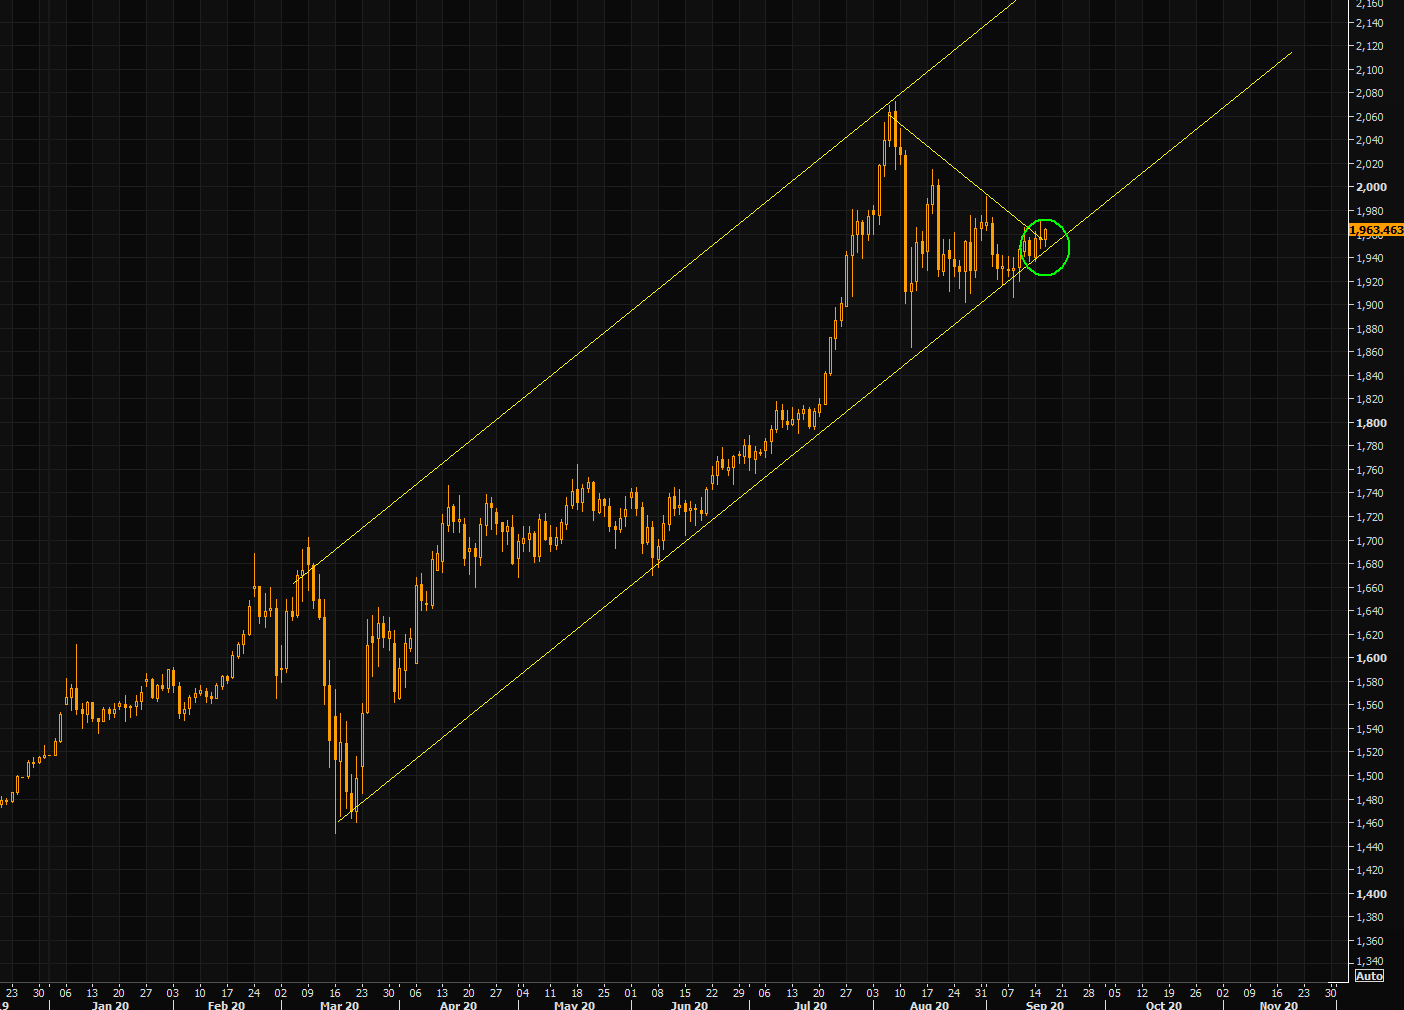 Gold - will the trajectory higher reignite?